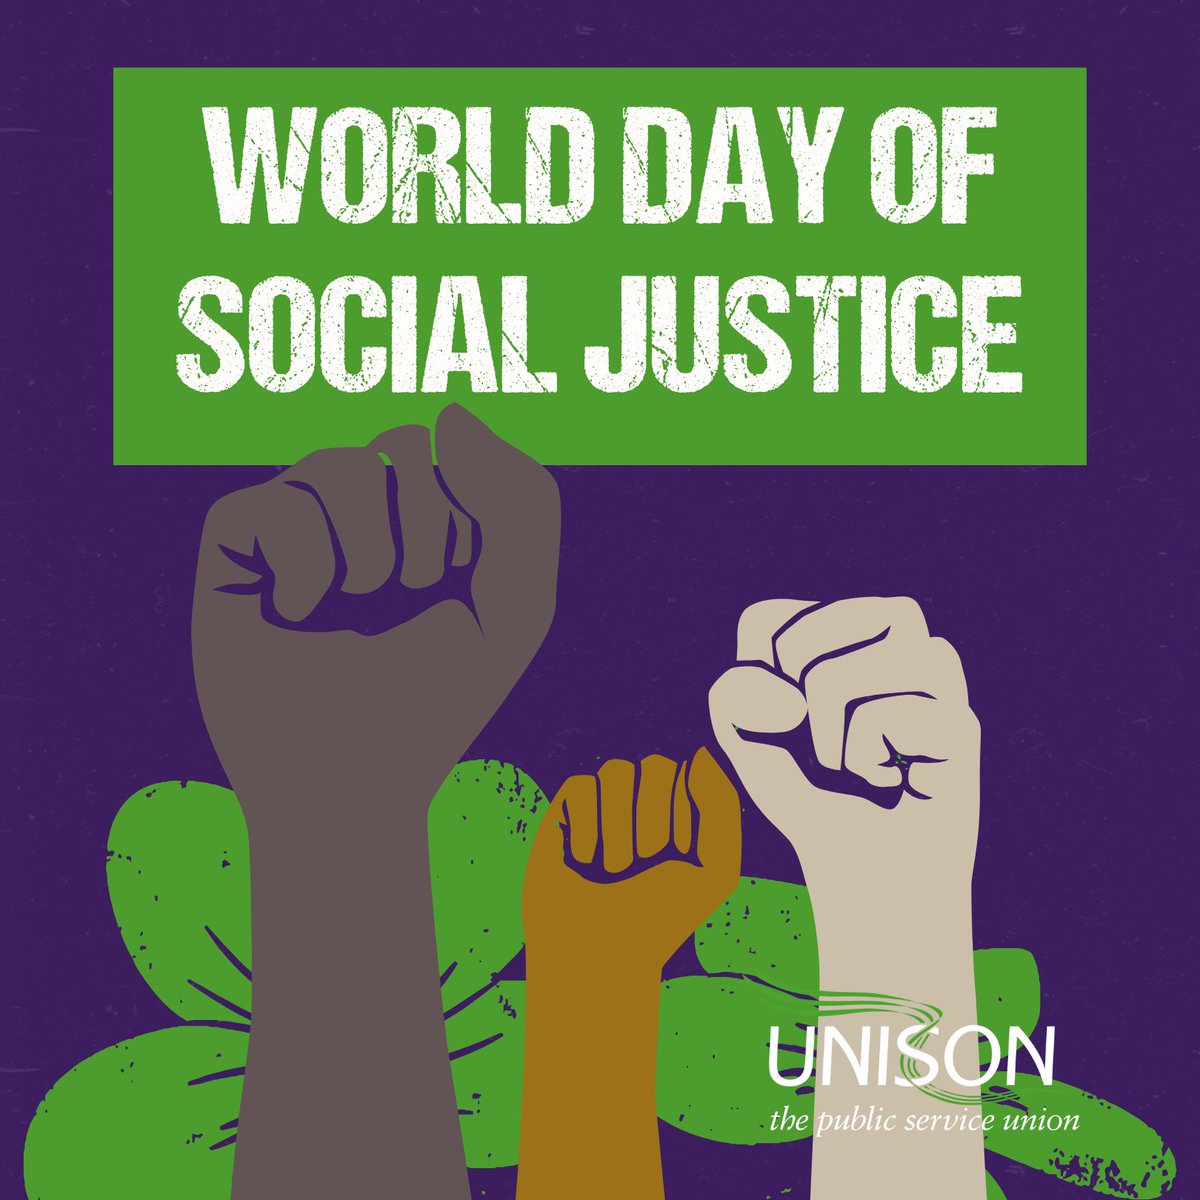 We’re celebrating #WorldDayOfSocialJustice by acknowledging the power of solidarity✊🏾 Together with the international union movement, we advocate for social justice, workers' rights, and equitable opportunities.